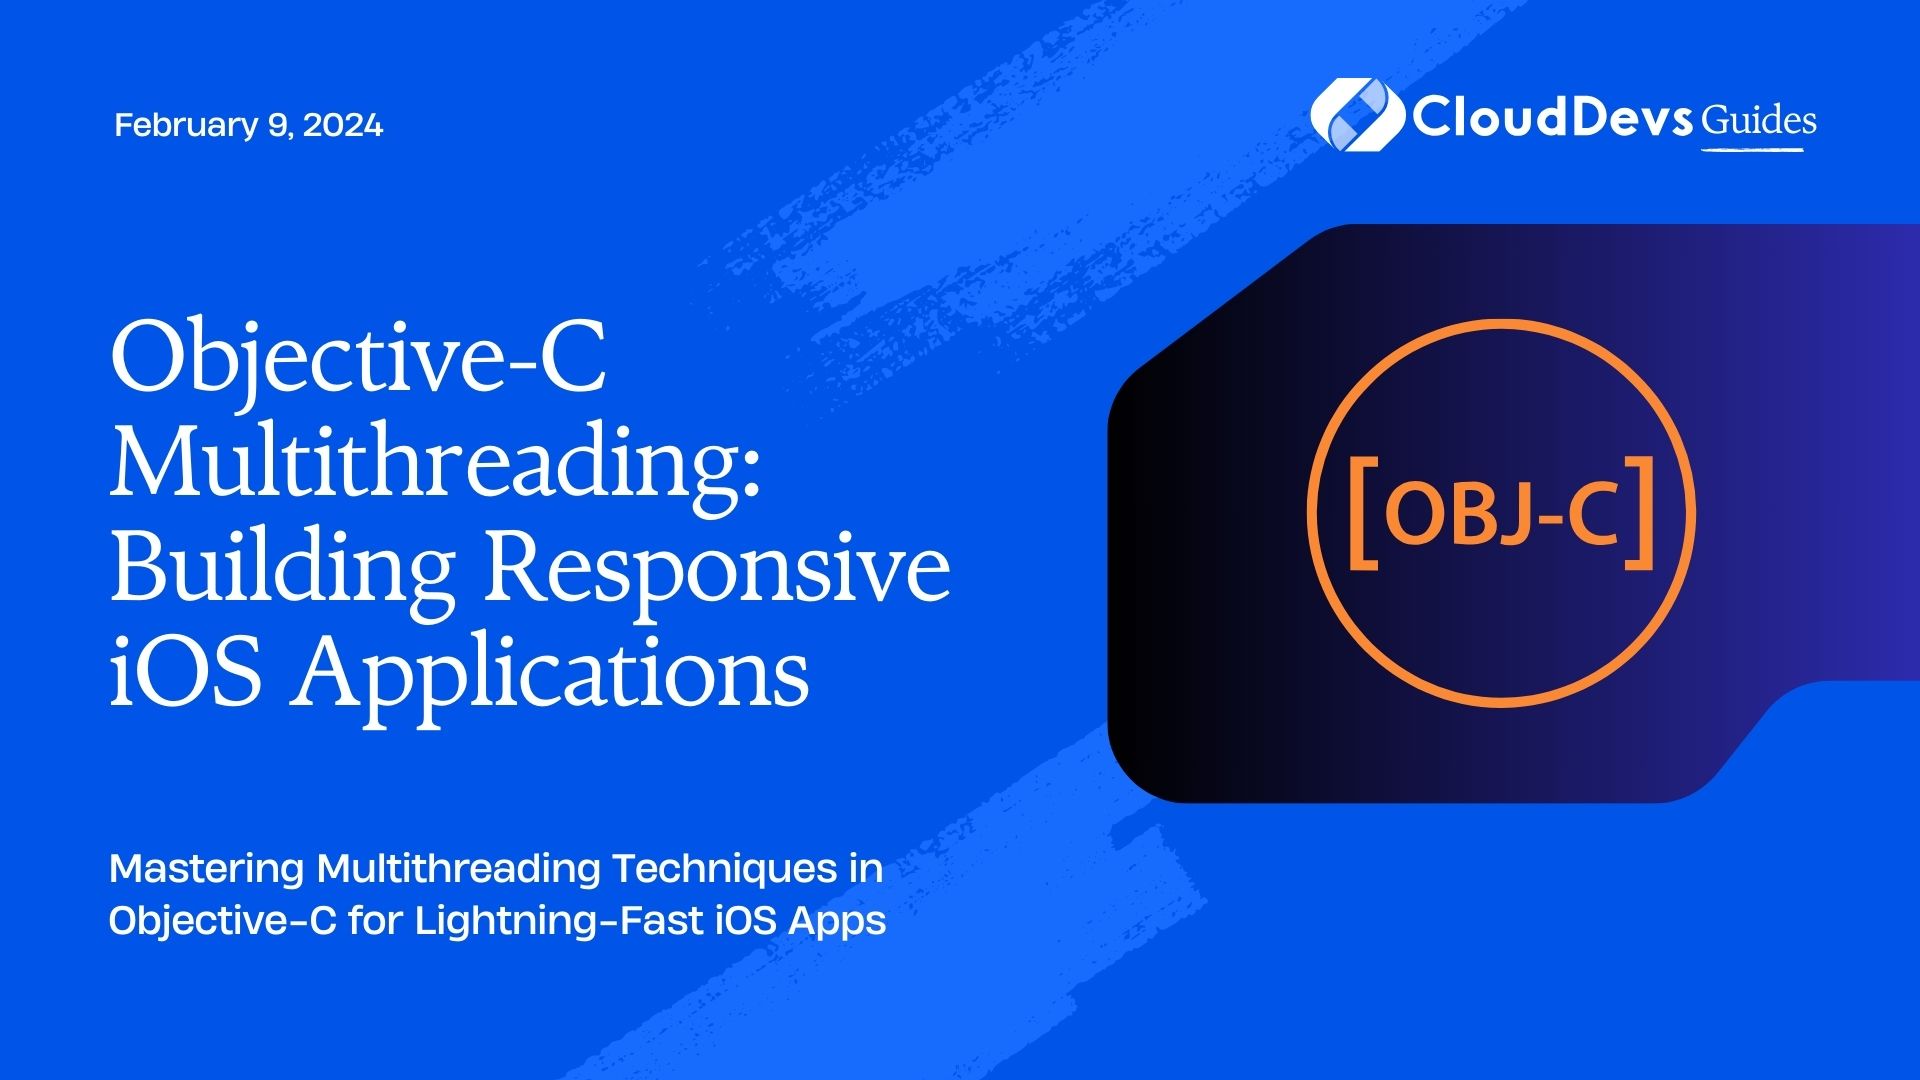 Objective-C Multithreading: Building Responsive iOS Applications